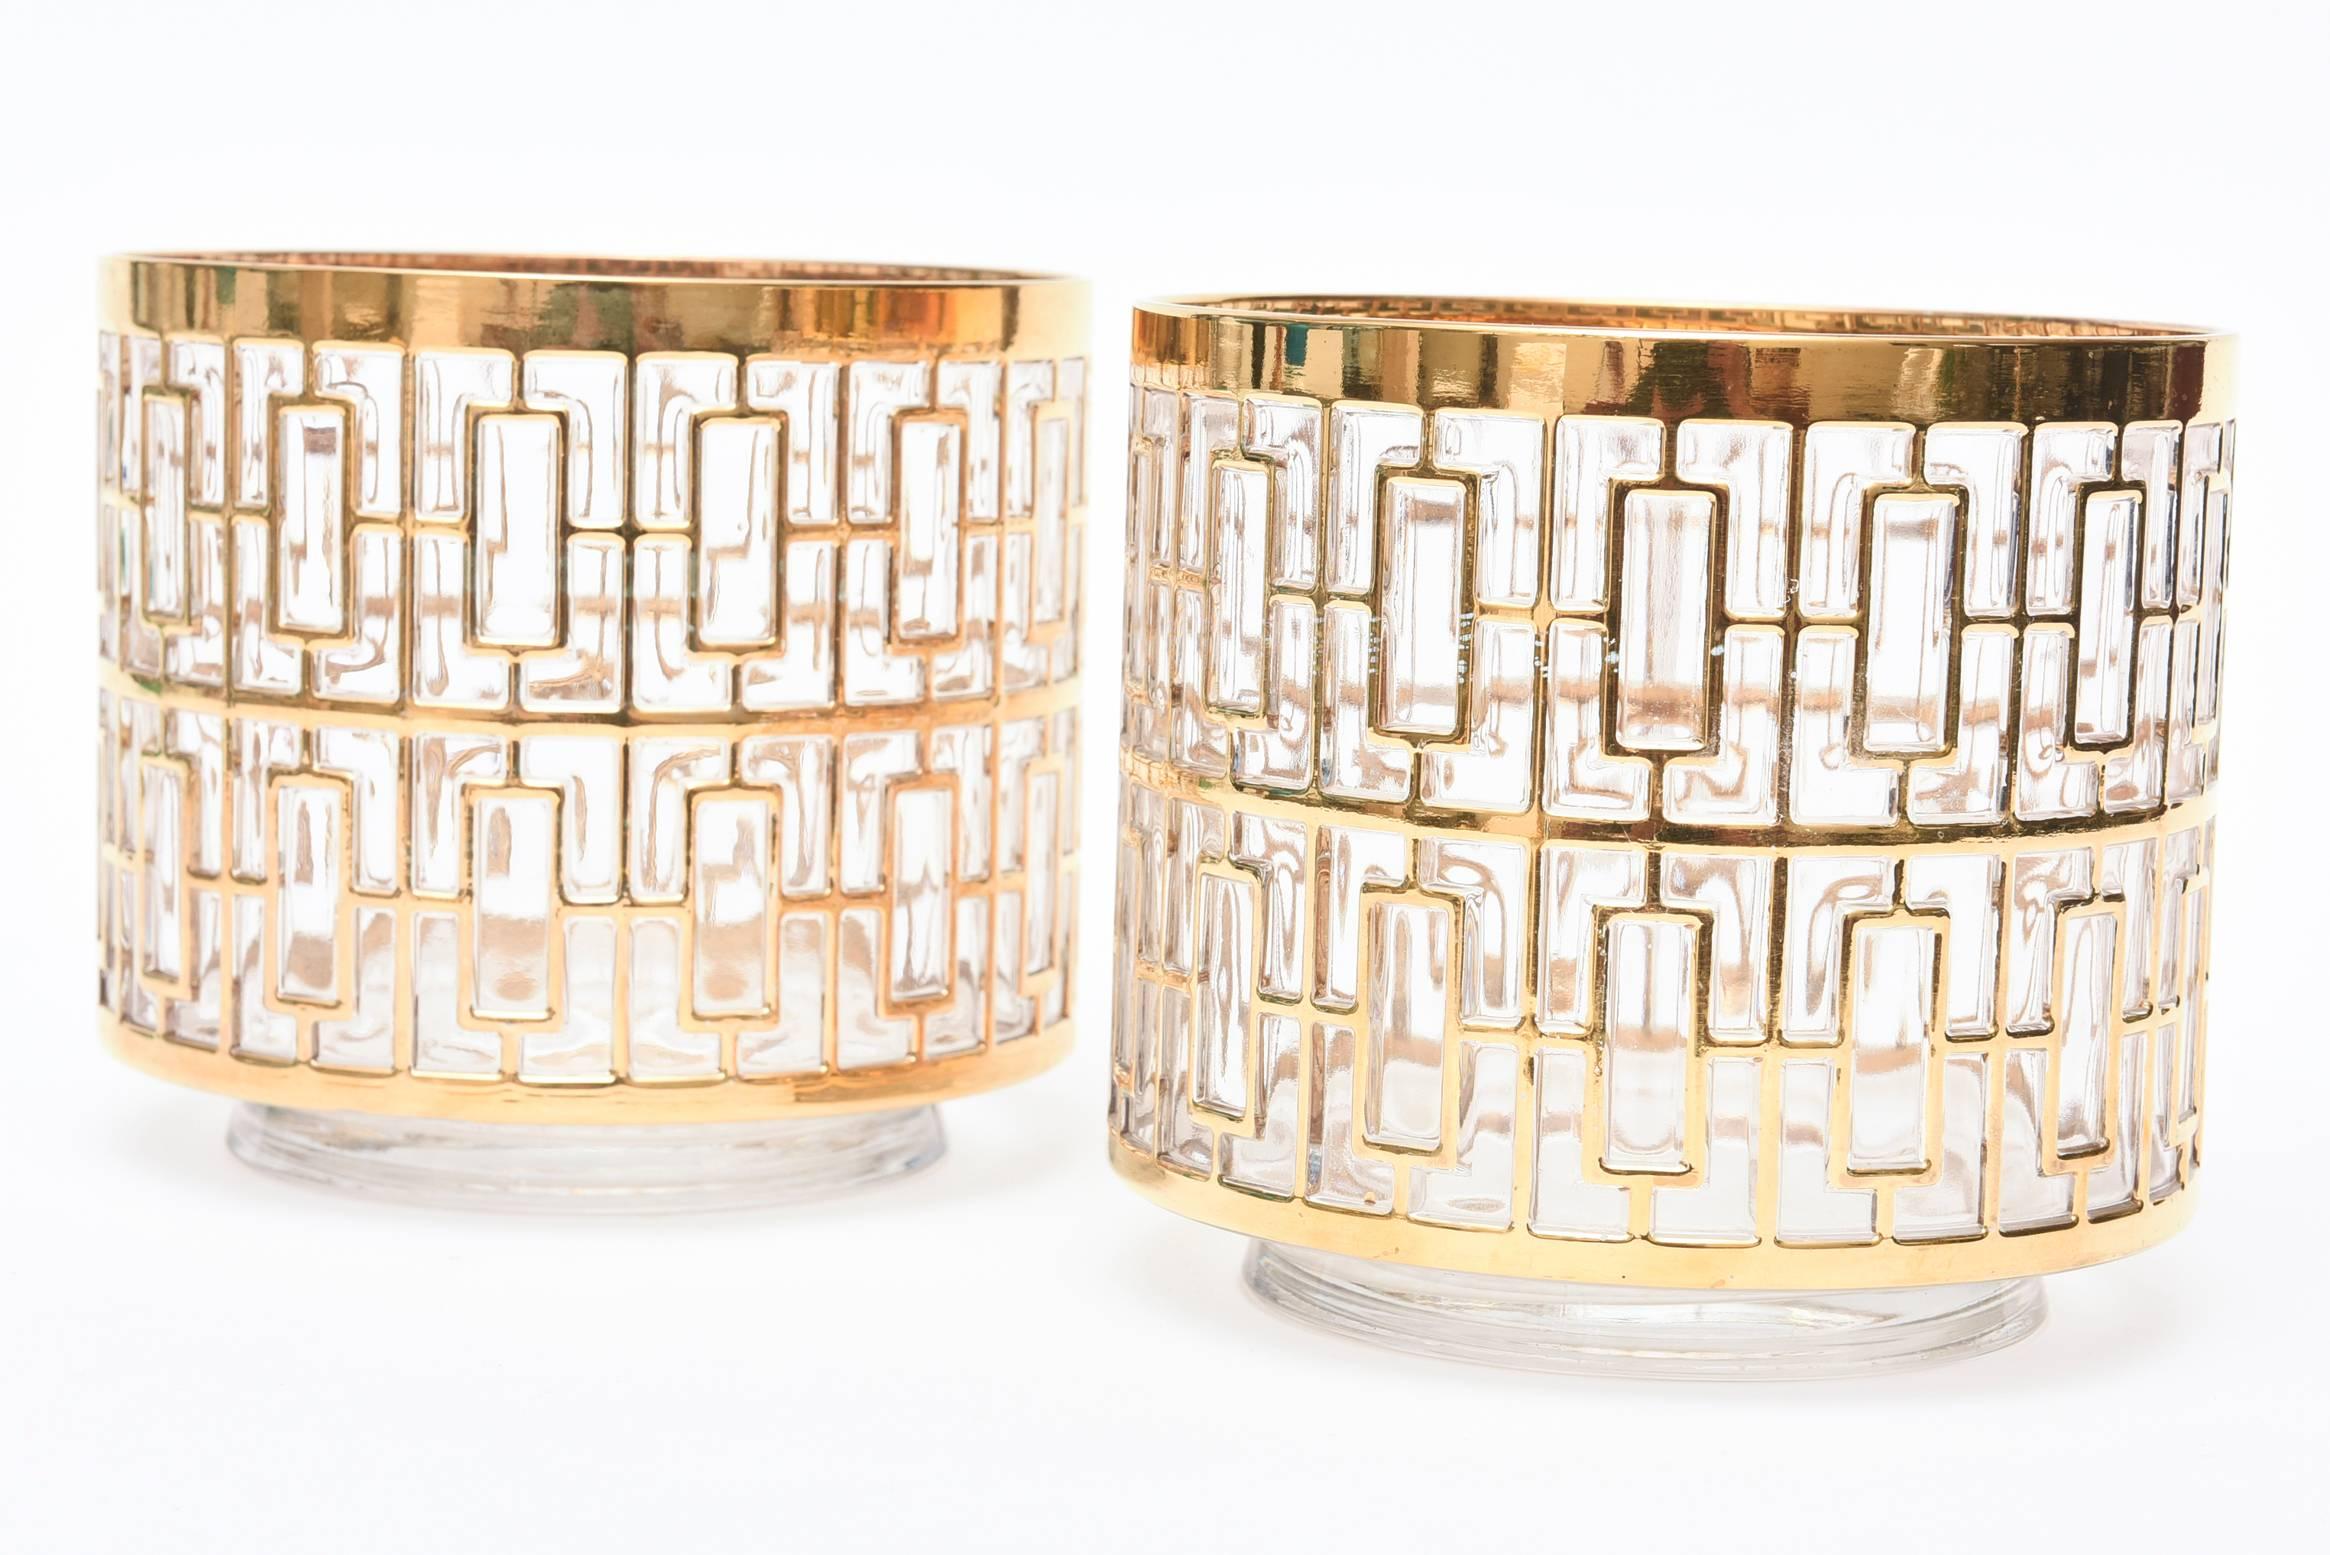 These pair of elegant period ice buckets are from the 1960s.  The pattern is a shoji screen/greek key. They are timeless.
The good plating is 24-carat gold overlay over clear glass and must be hand washed. Not safe for any dishwasher.
They can